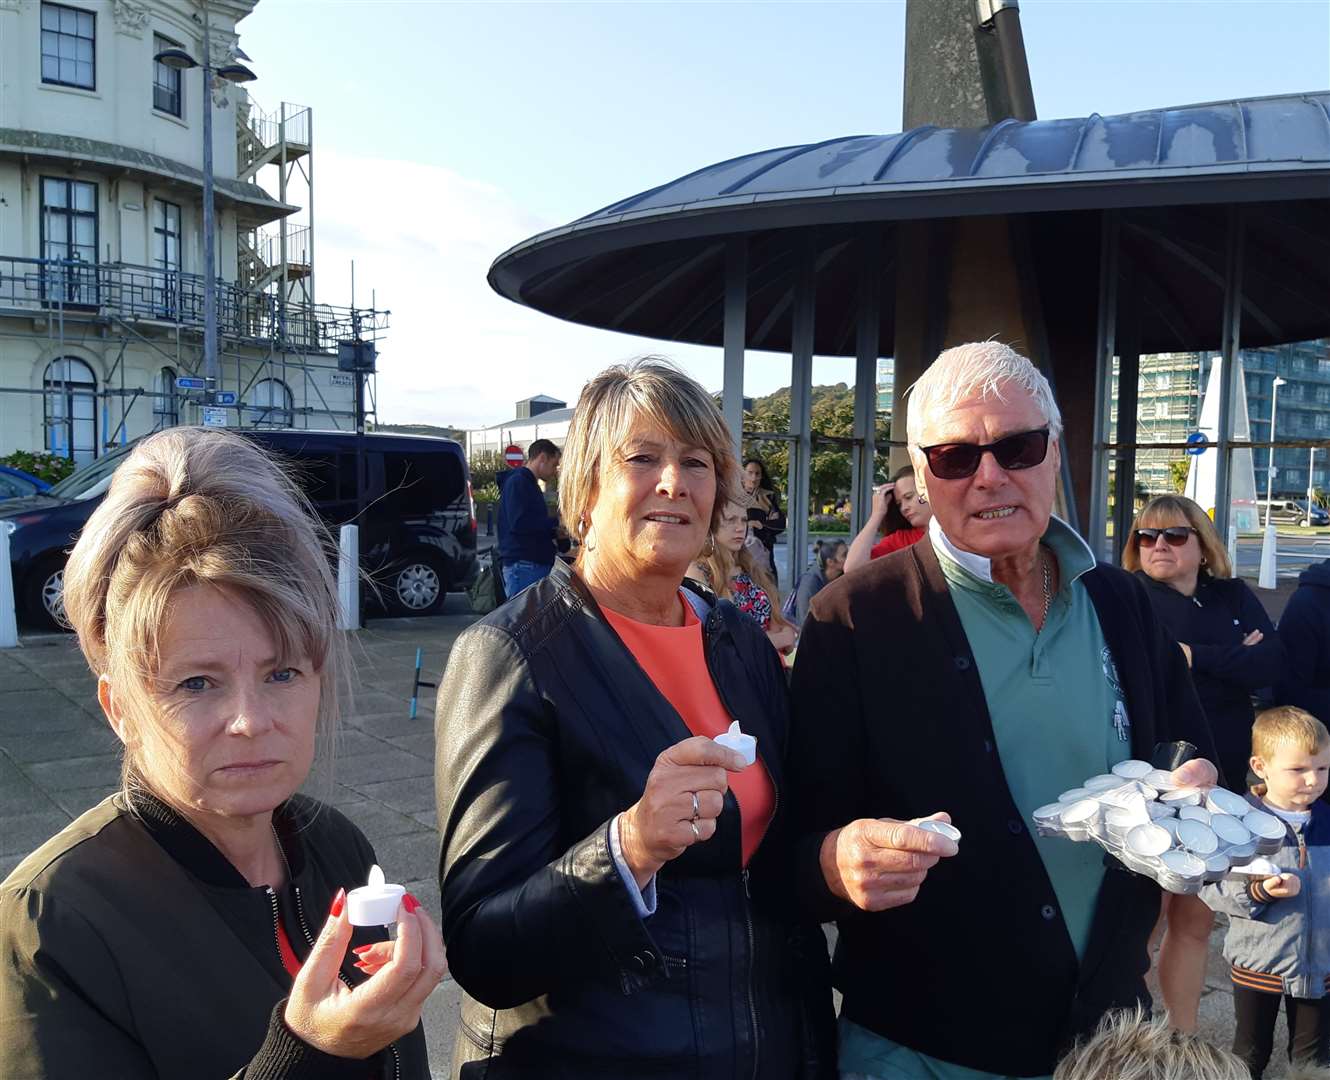 Cara O'Reilly, Patricia Berry, Dave Pettman showing their support at the Dover vigil